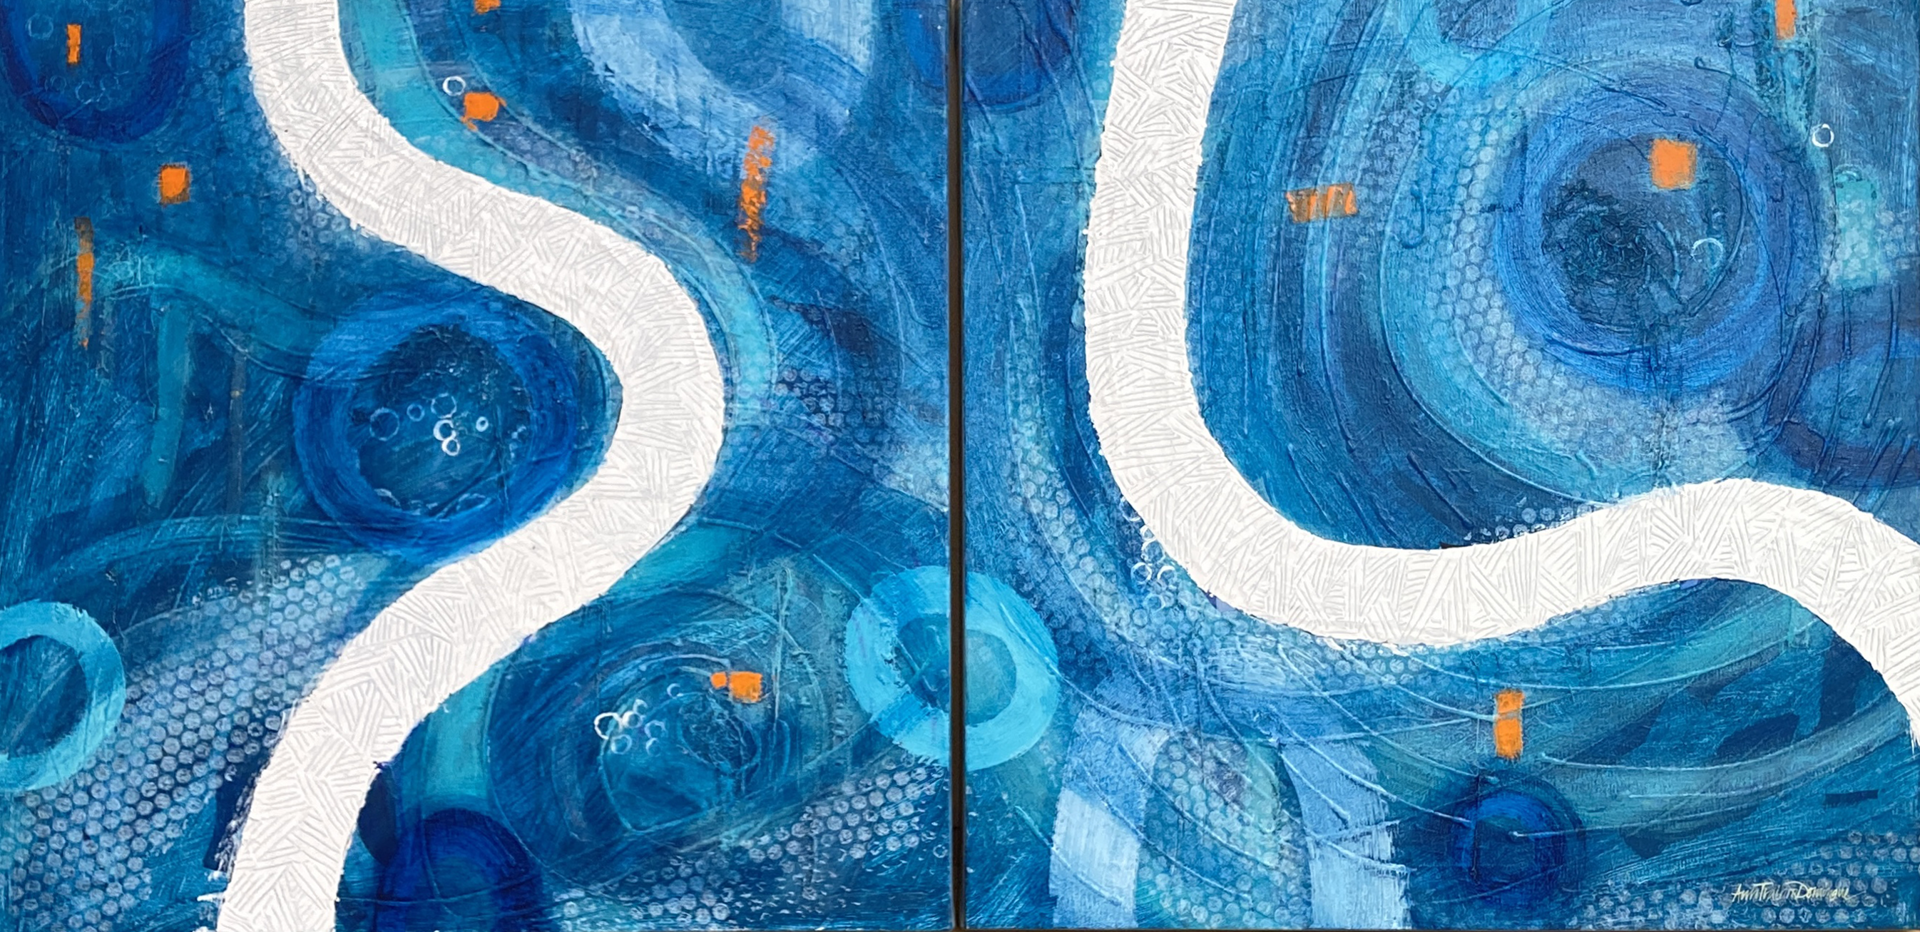 Endless, Diptych by Ann Trainor Domingue